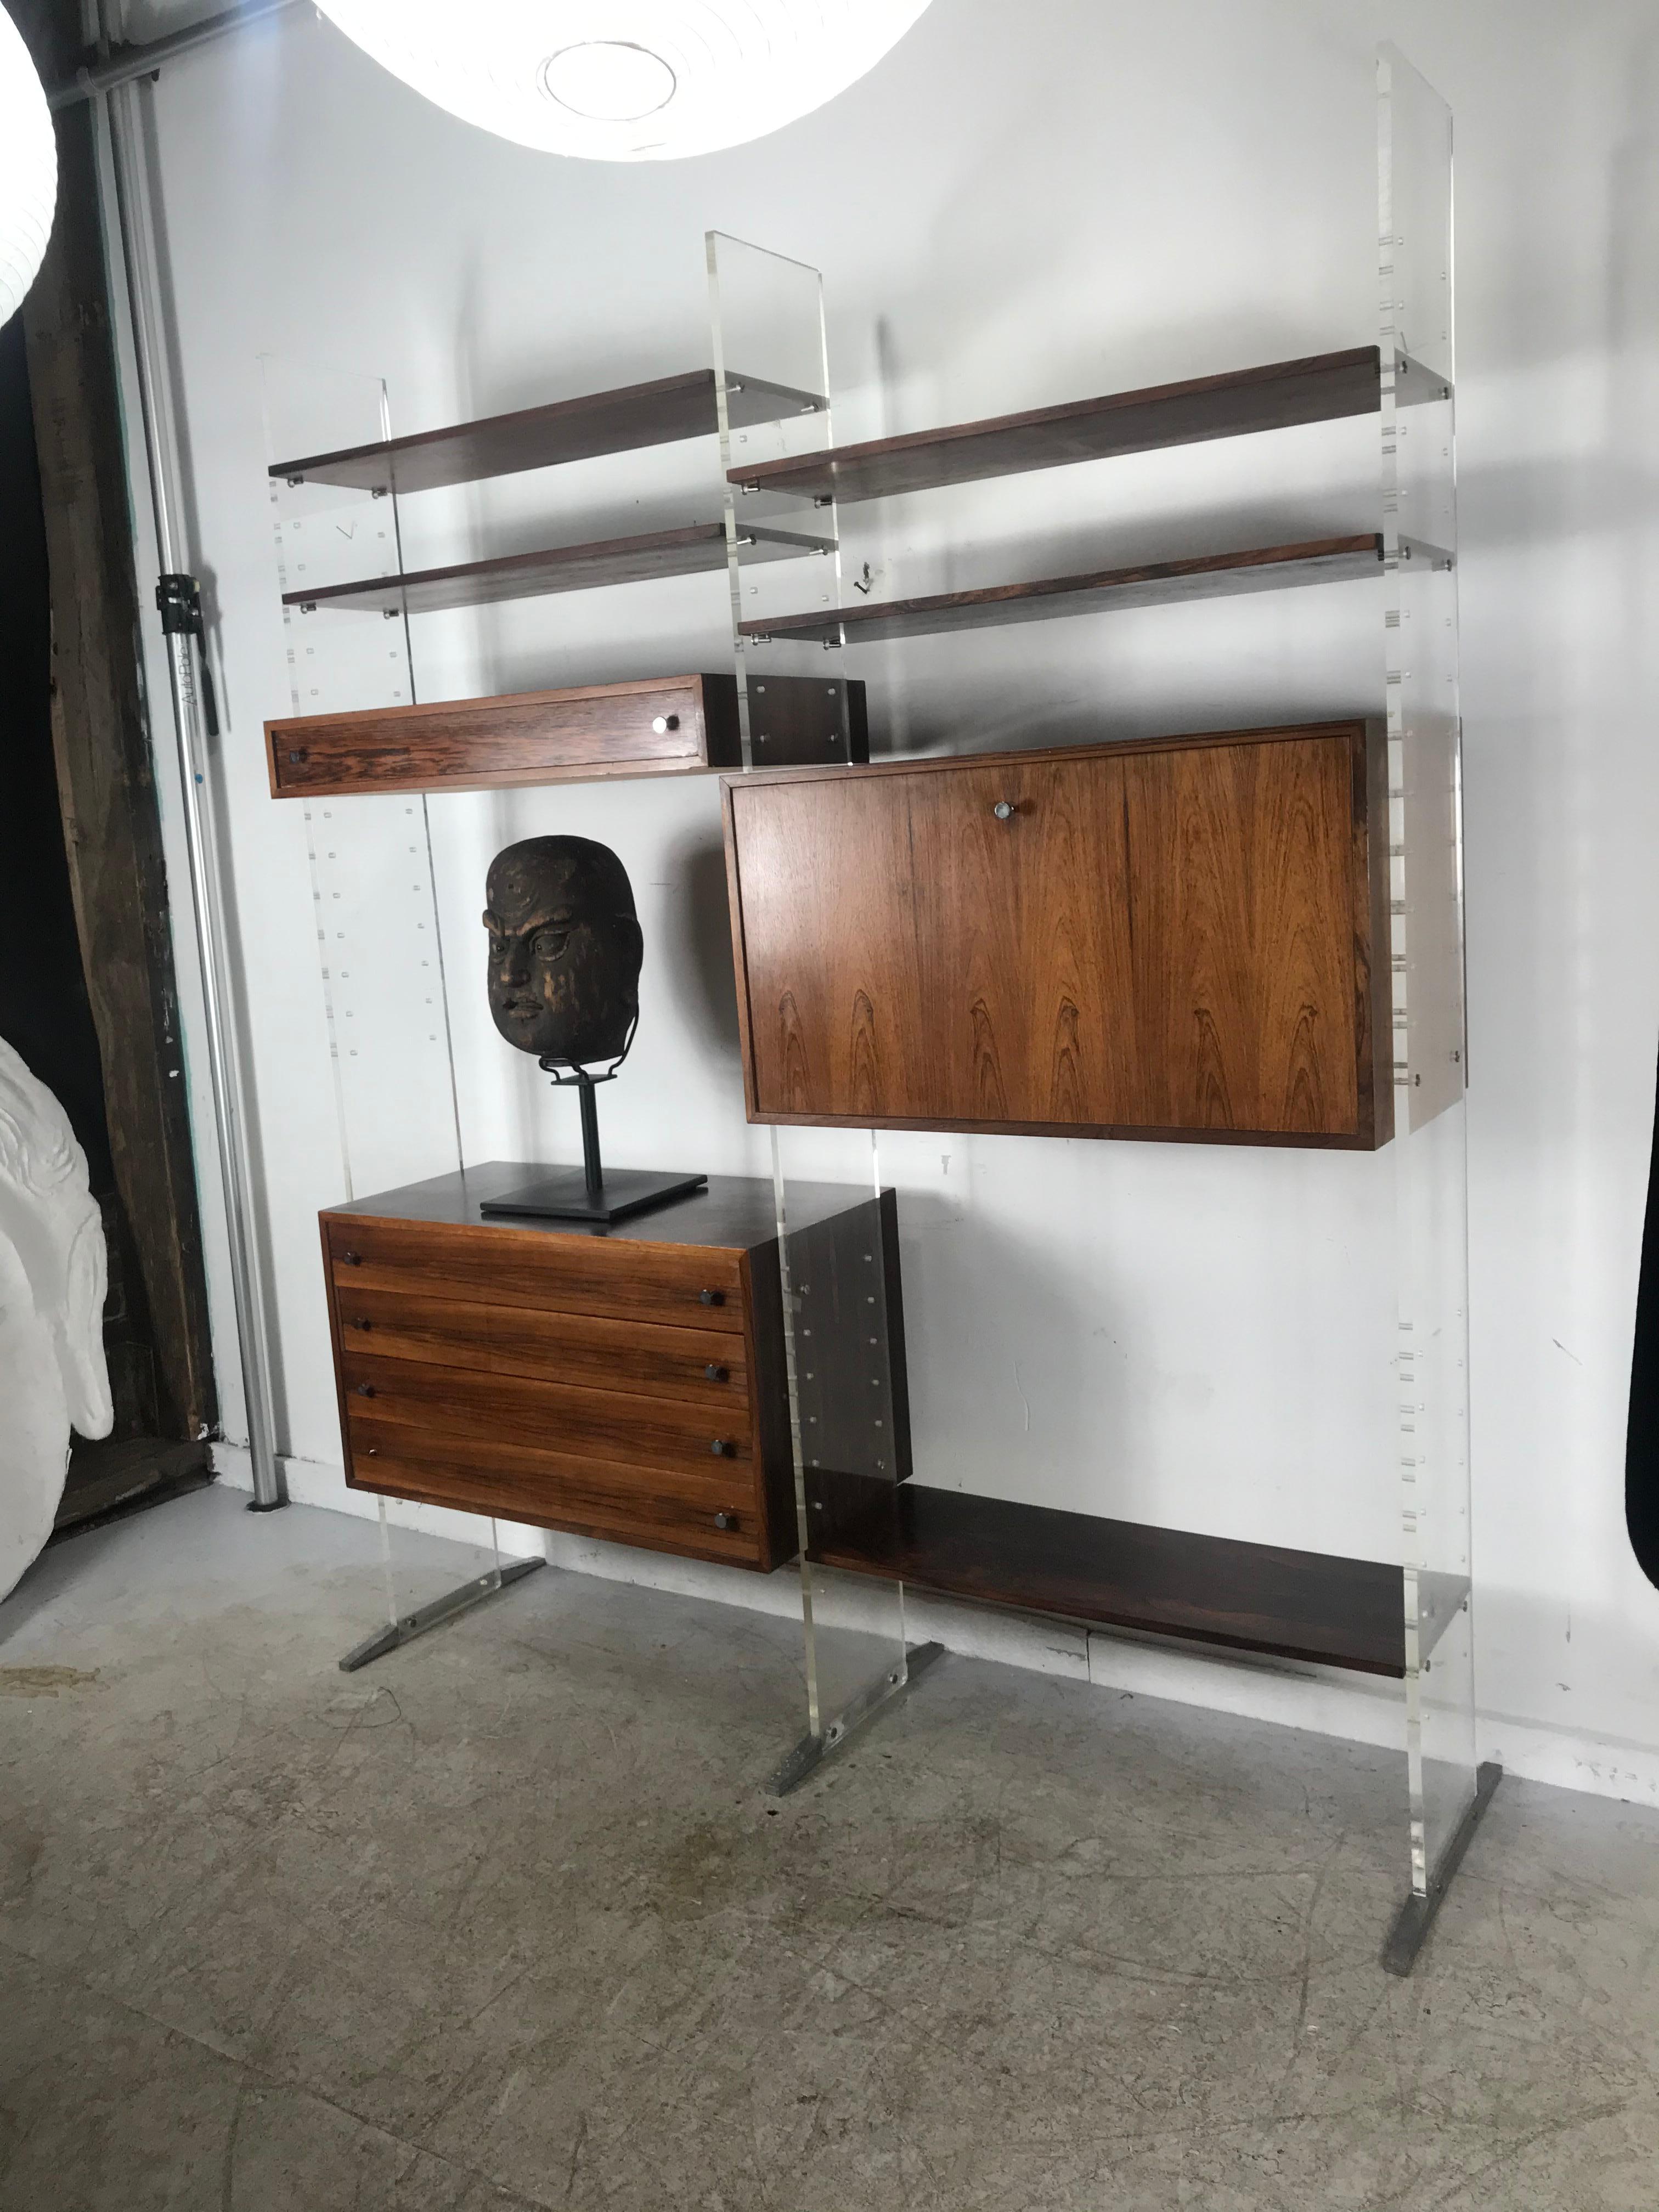 Aluminum Poul Nørreklit Wall Unit in Plexiglass / Lucite and Rosewood, Denmark, 1960s For Sale